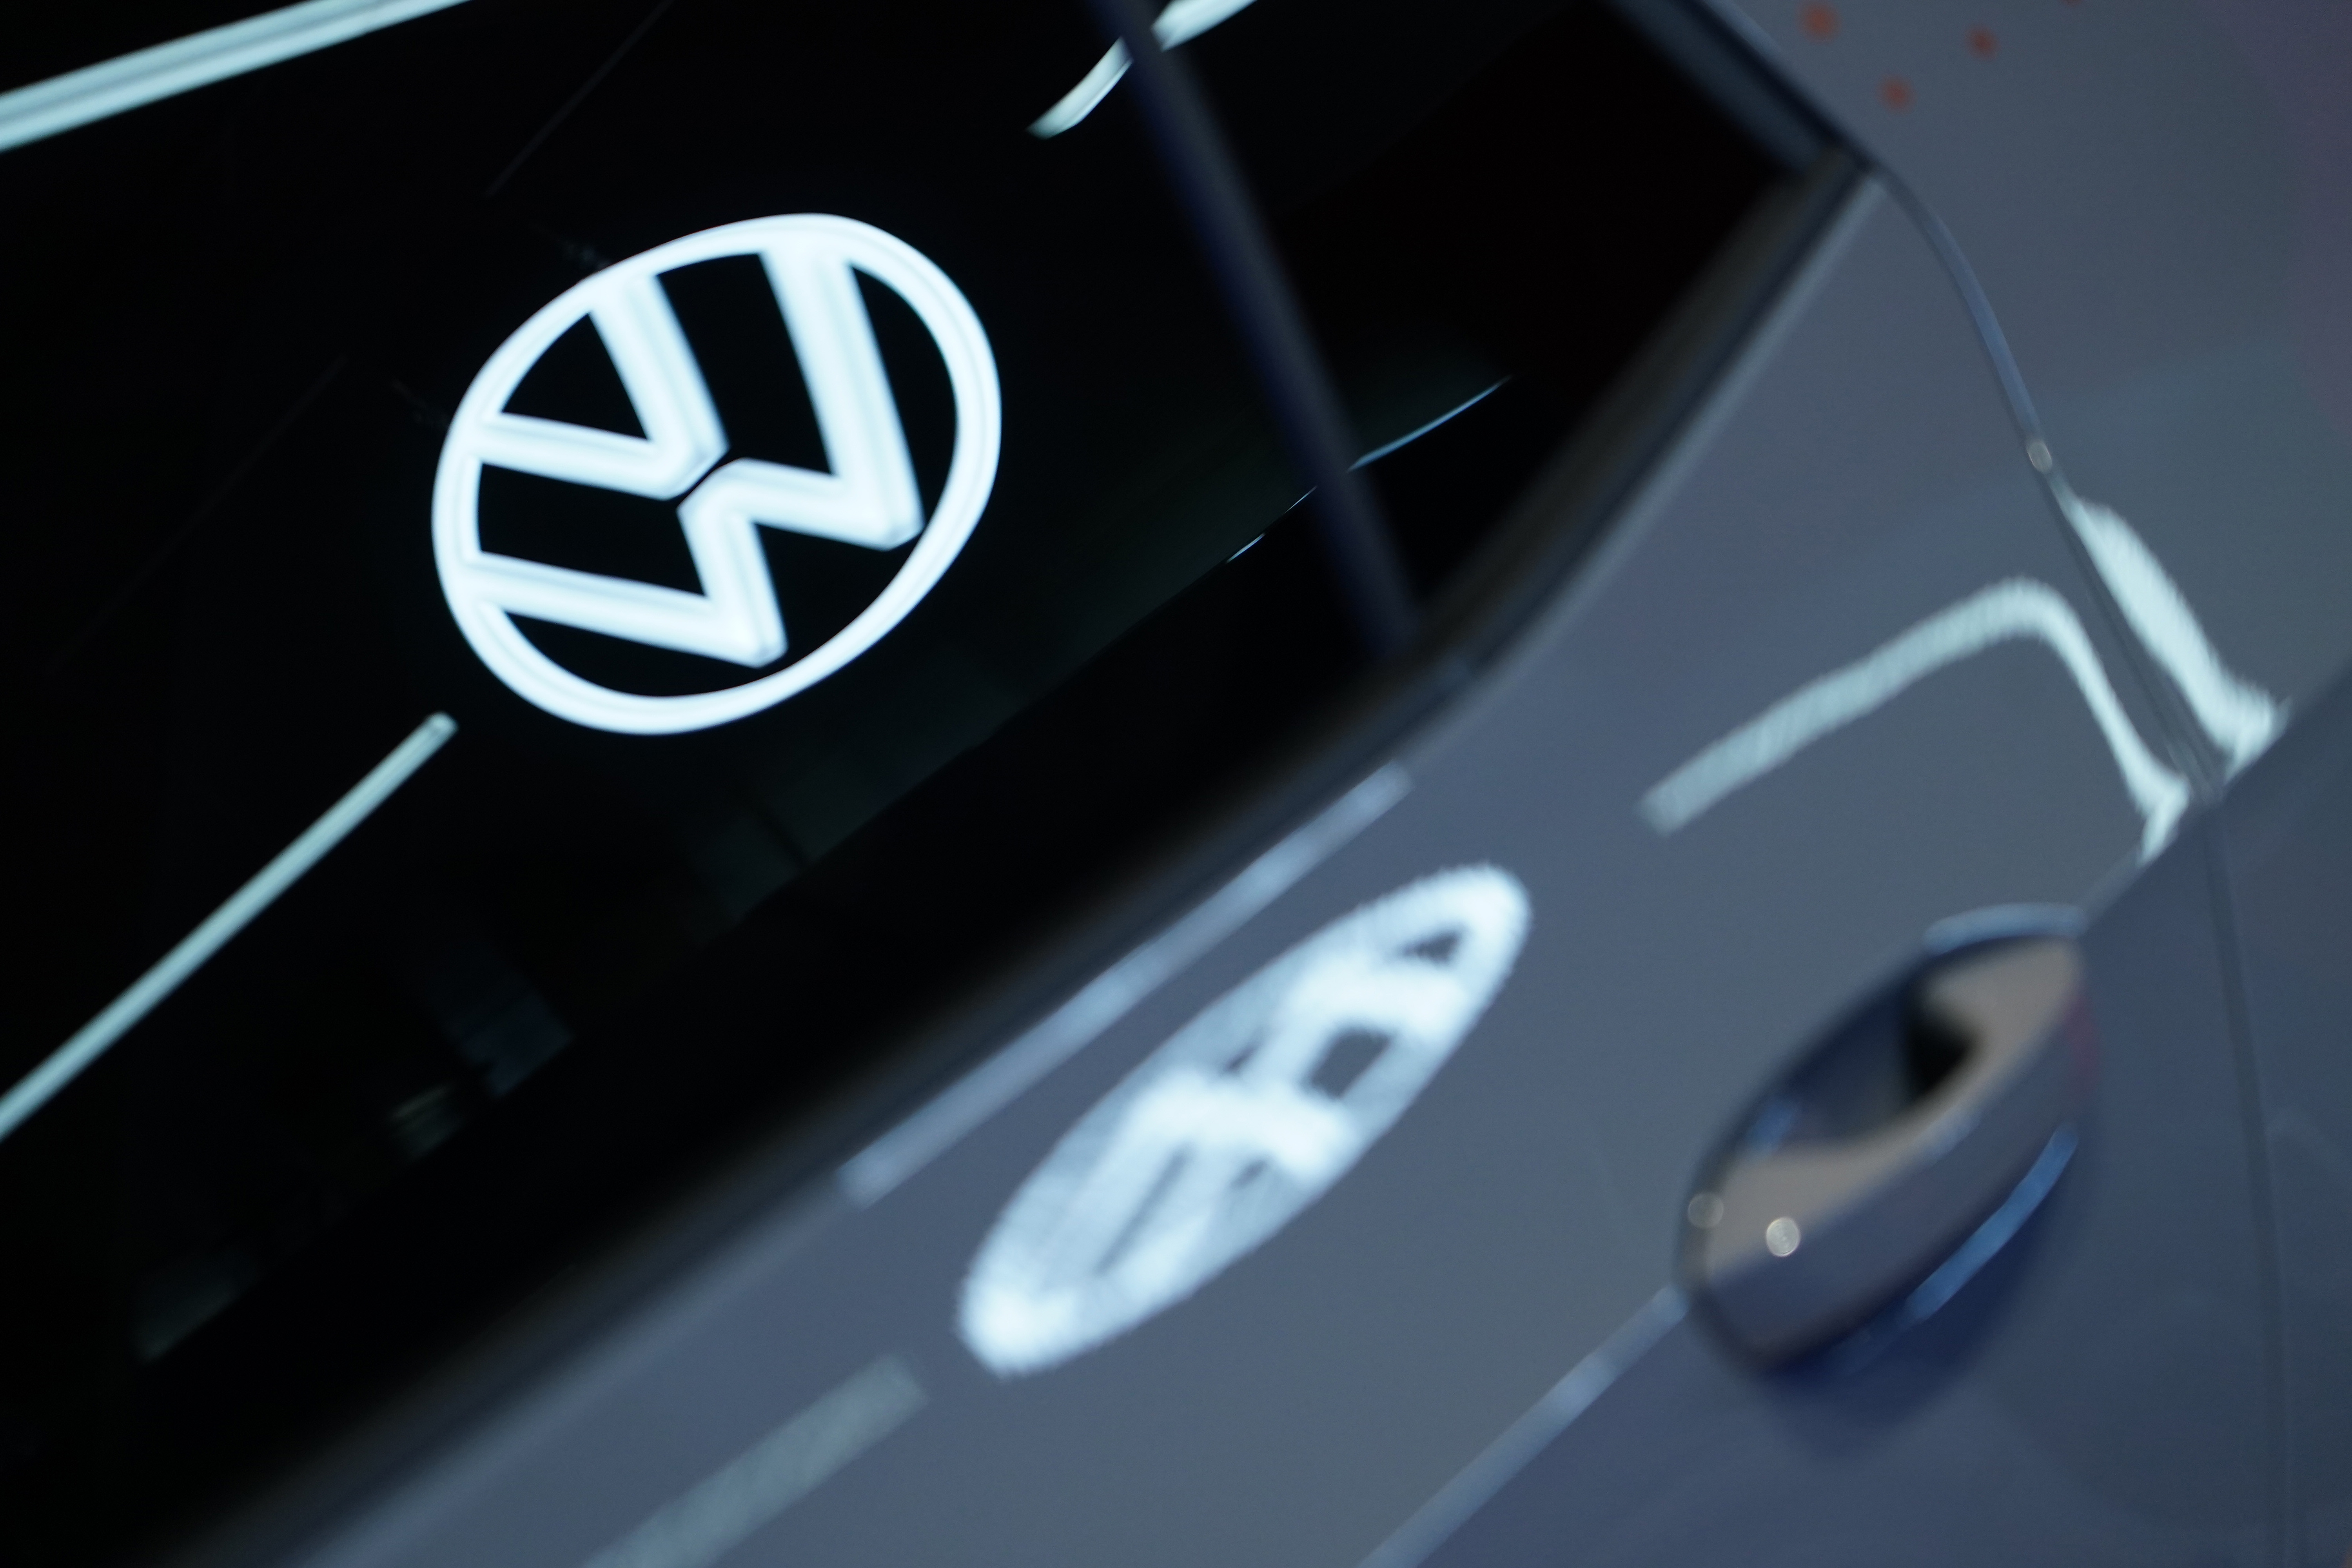 seekingalpha.com - Clark Schultz - Volkswagen temporarily pulls back on electric vehicle production after demand slows